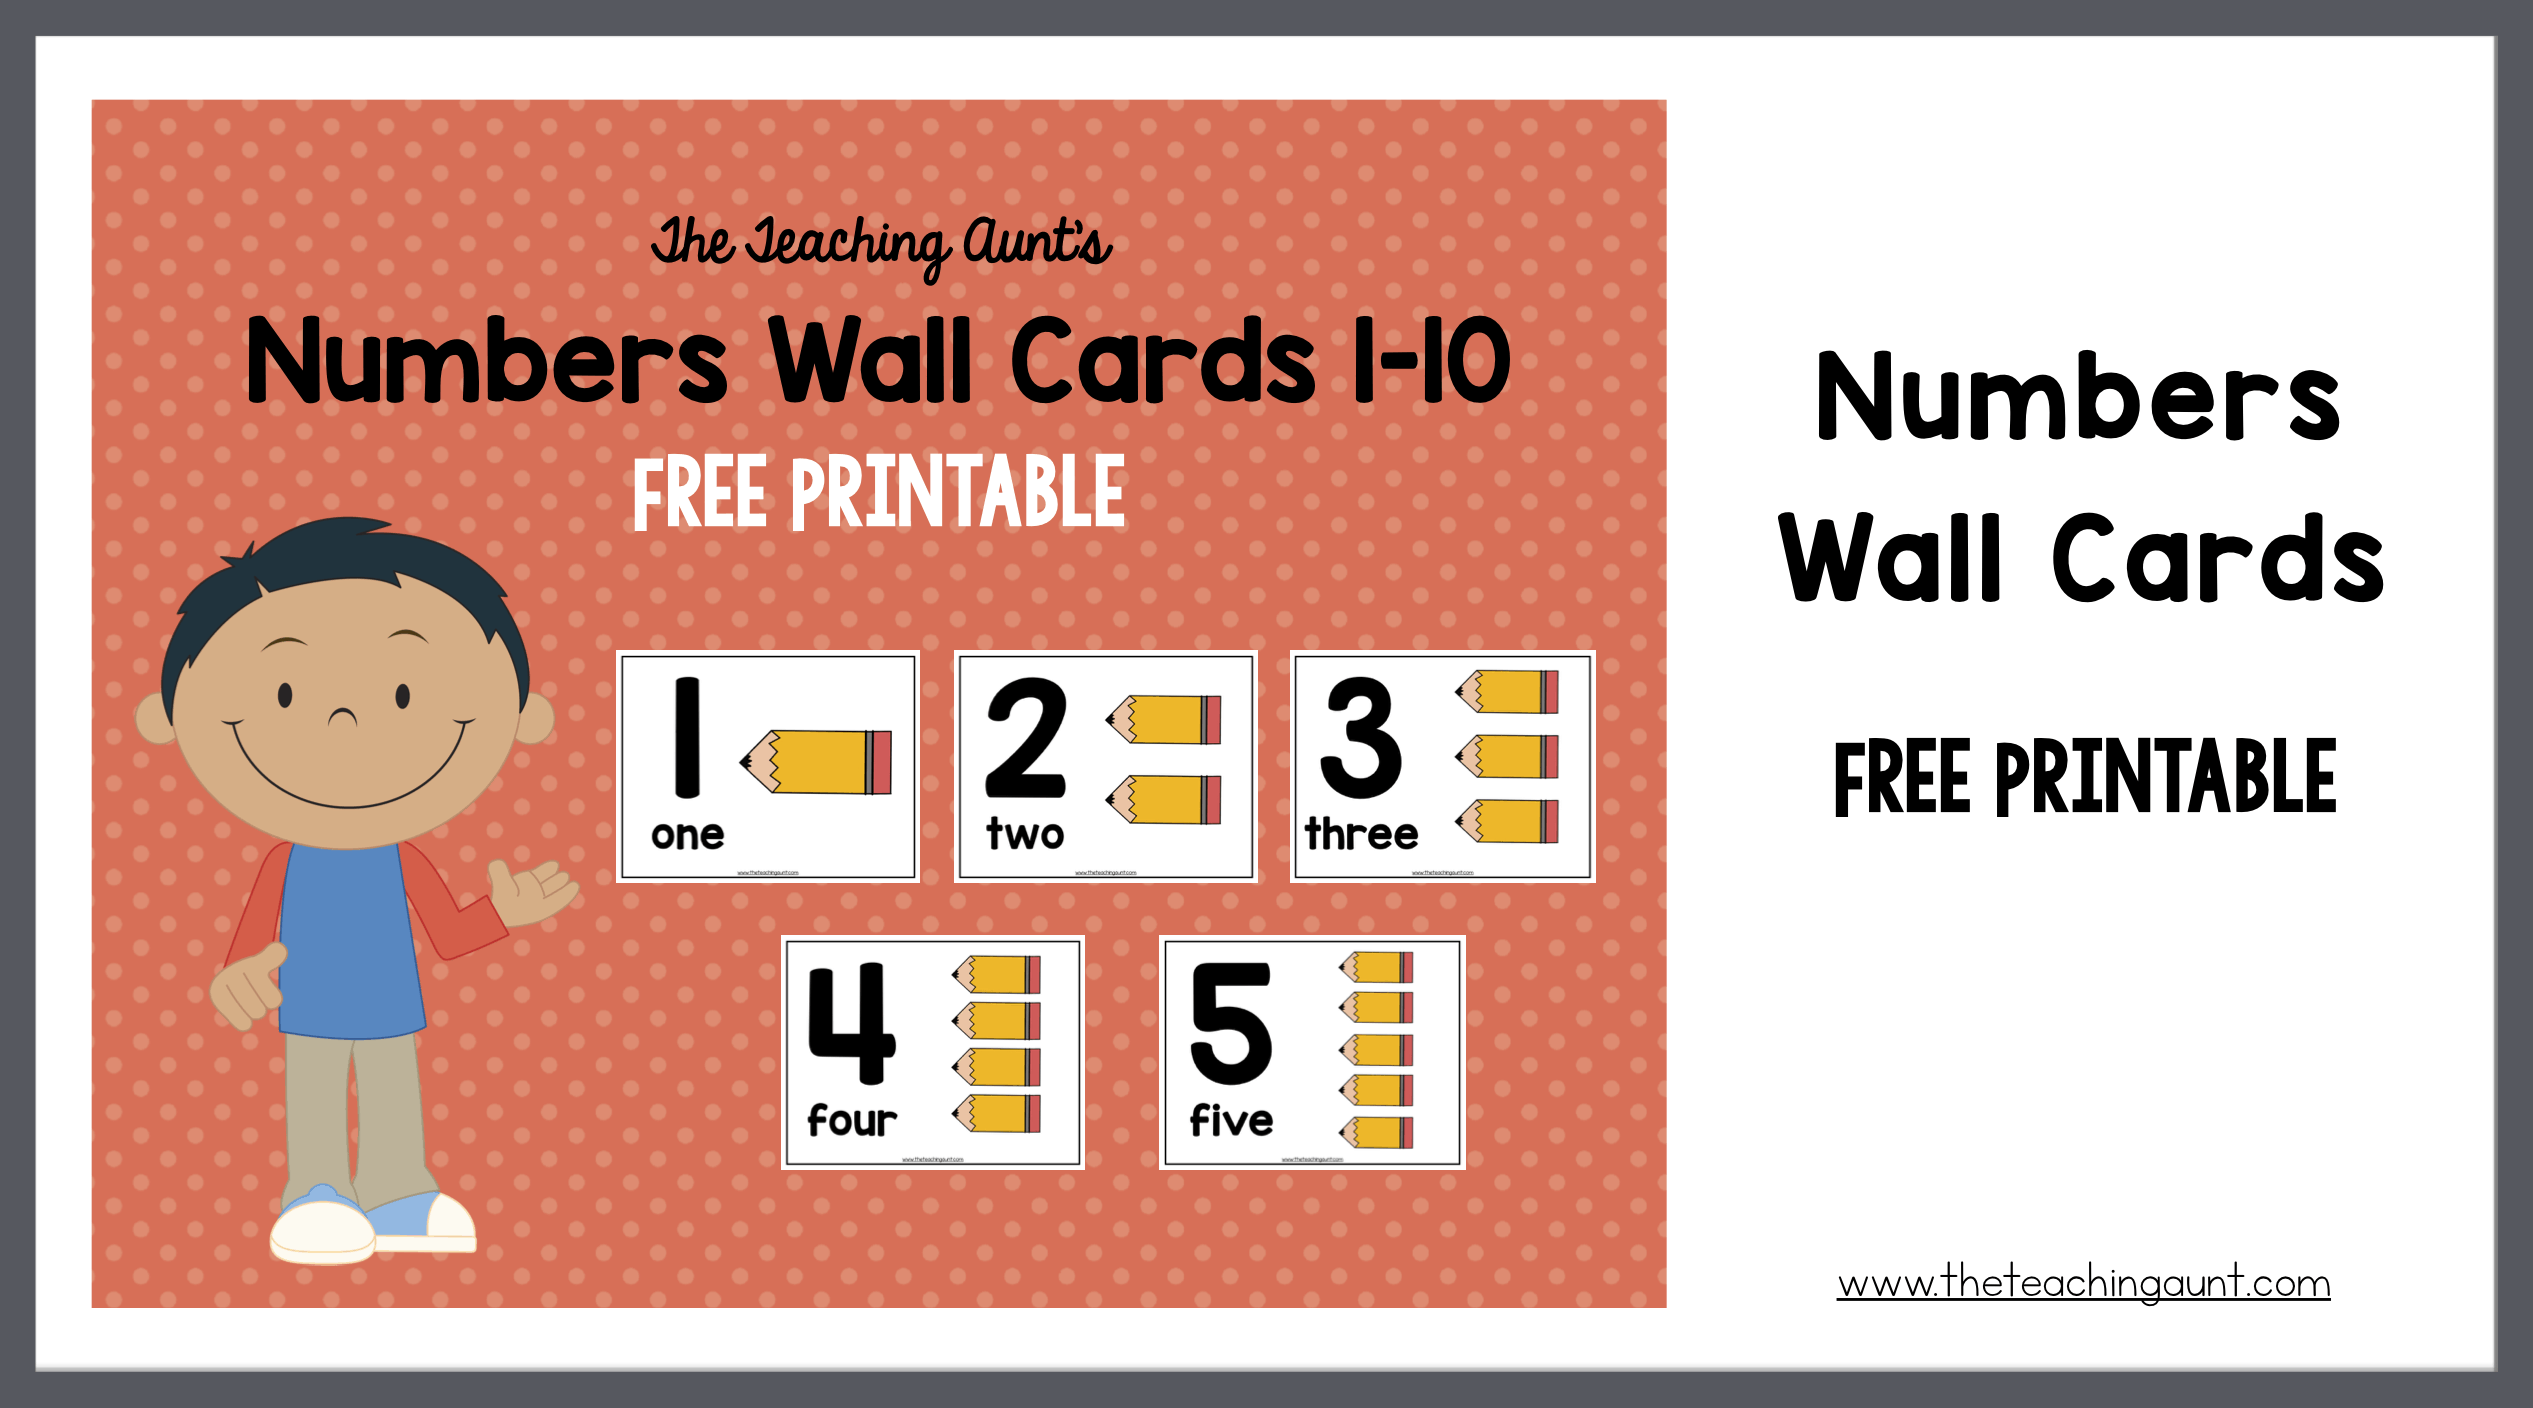 Numbers 1-10 Wall Cards Free Printable- The Teaching Aunt